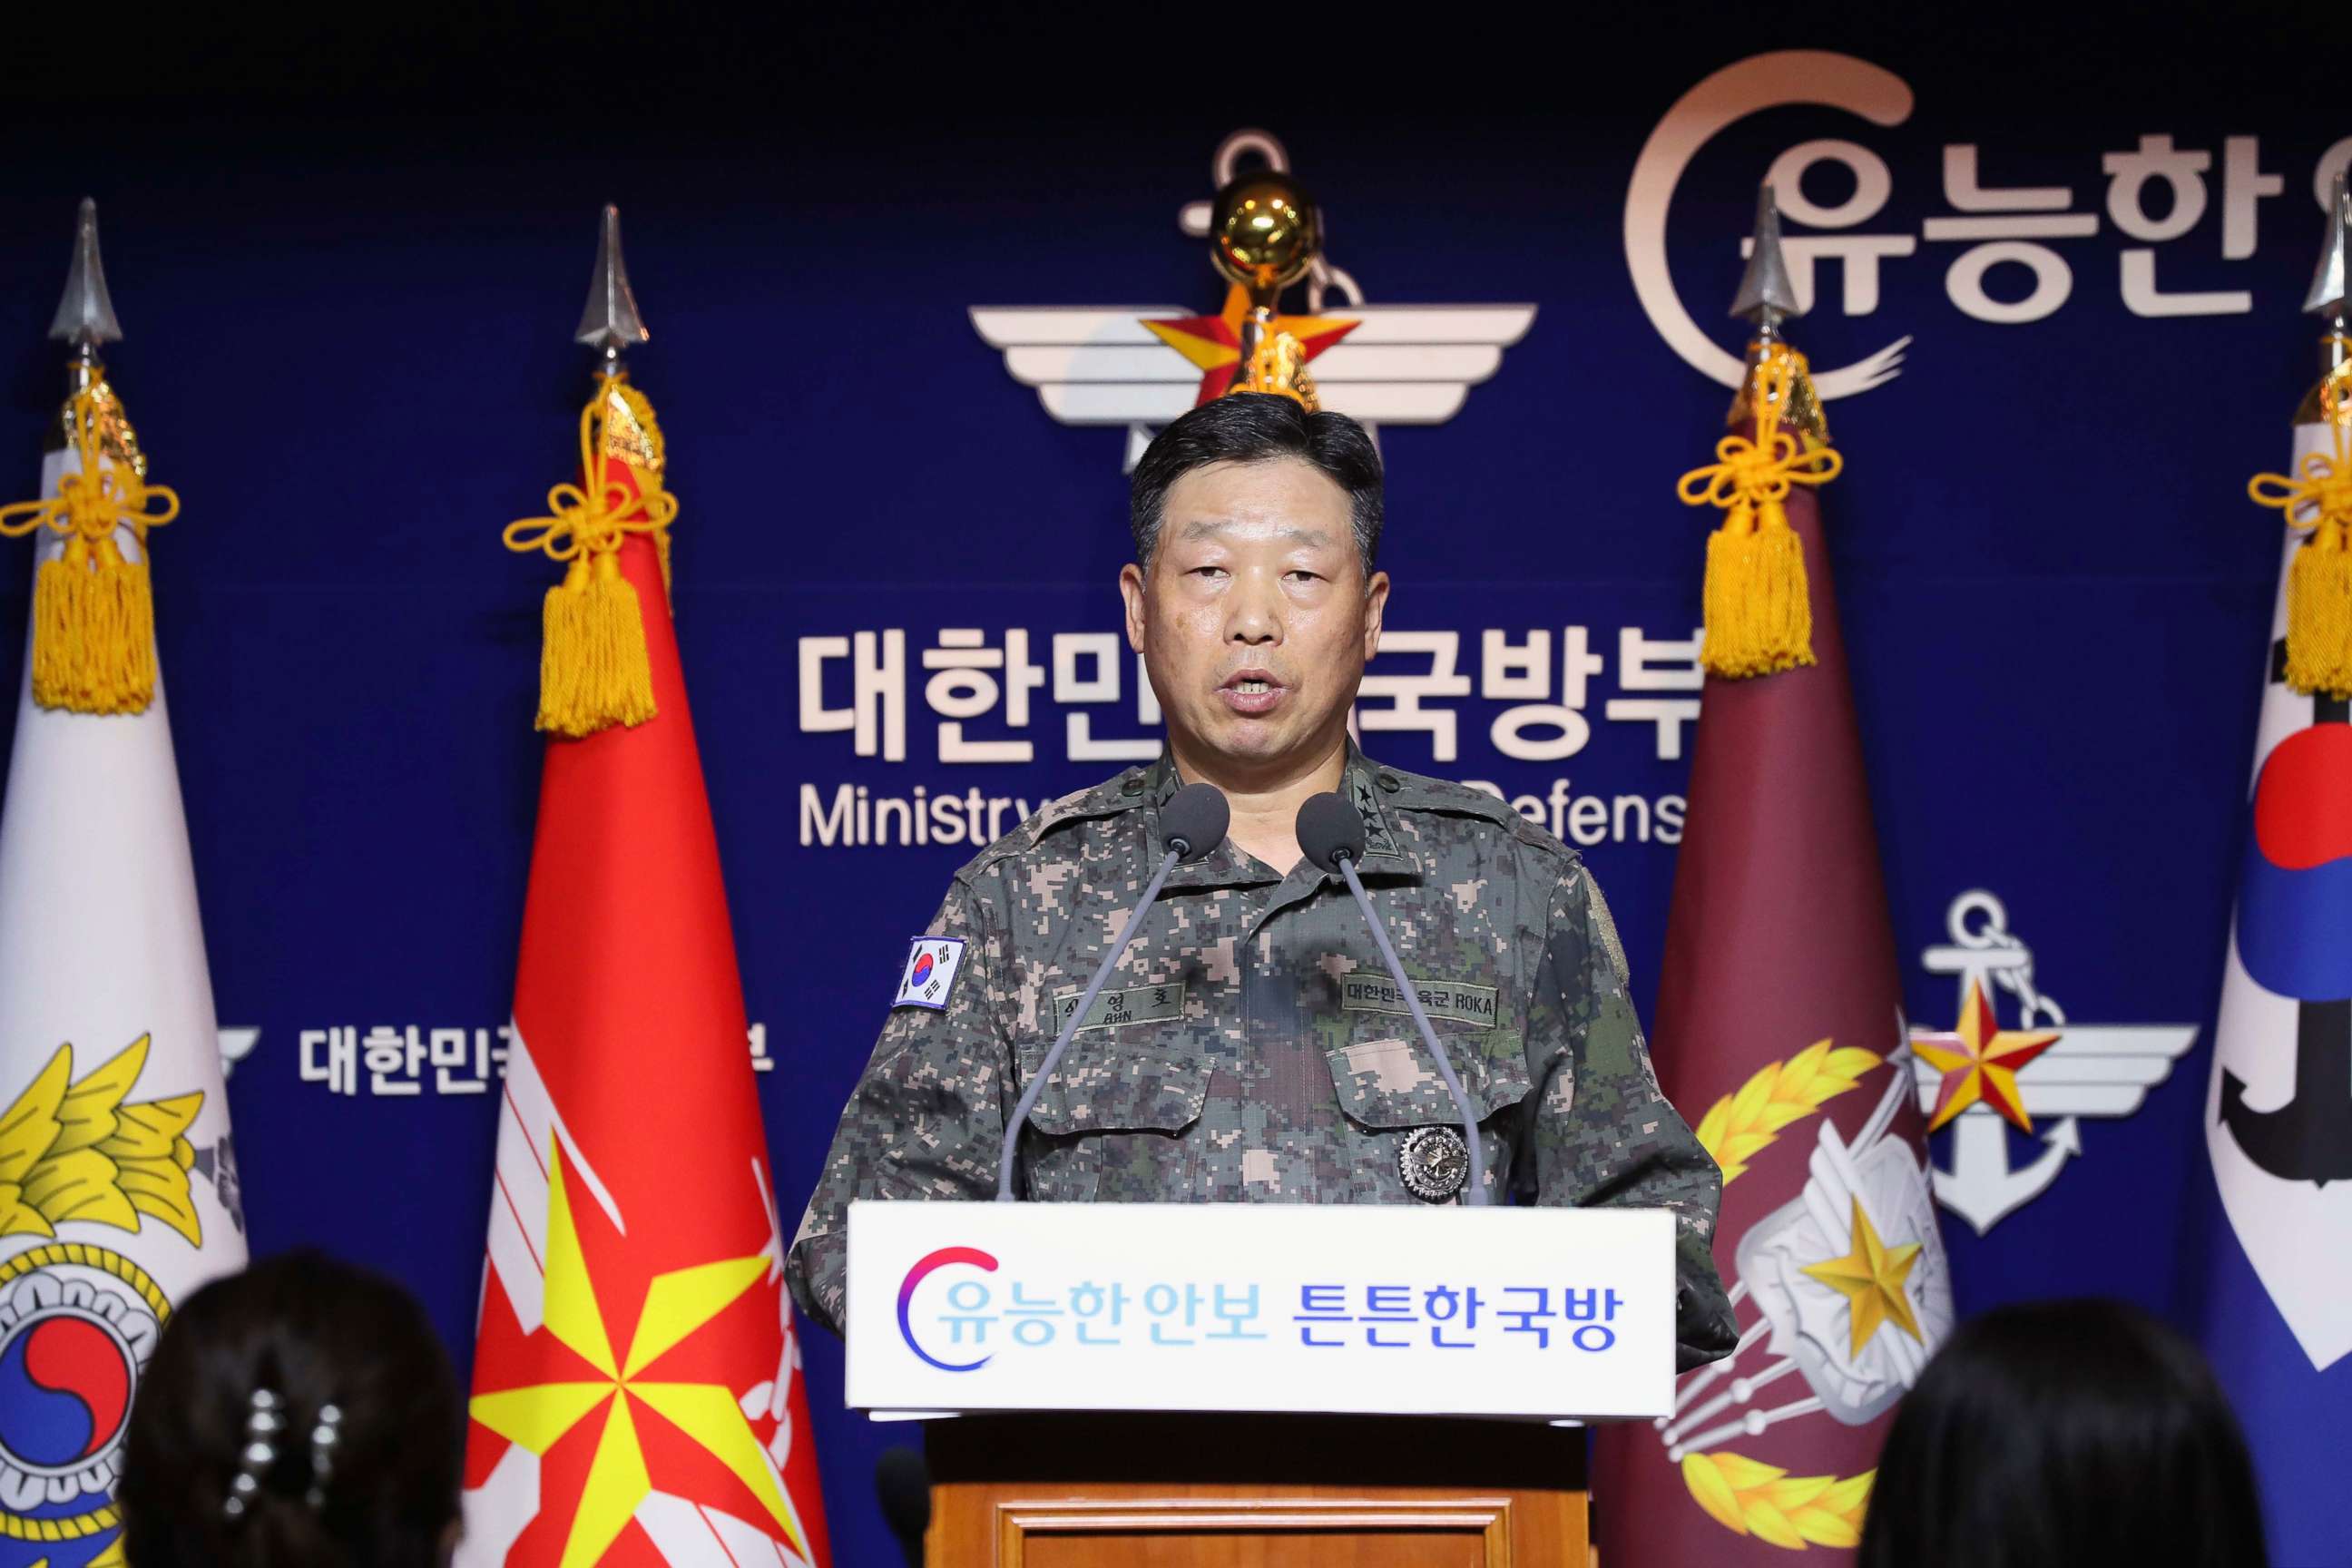 PHOTO: Lt. Gen. Ahn Young Ho, a top official at the South Korean military's office of the Joint Chiefs of Staff, speaks during a press conference at the Defense Ministry in Seoul, South Korea, Thursday, Sept. 24, 2020.